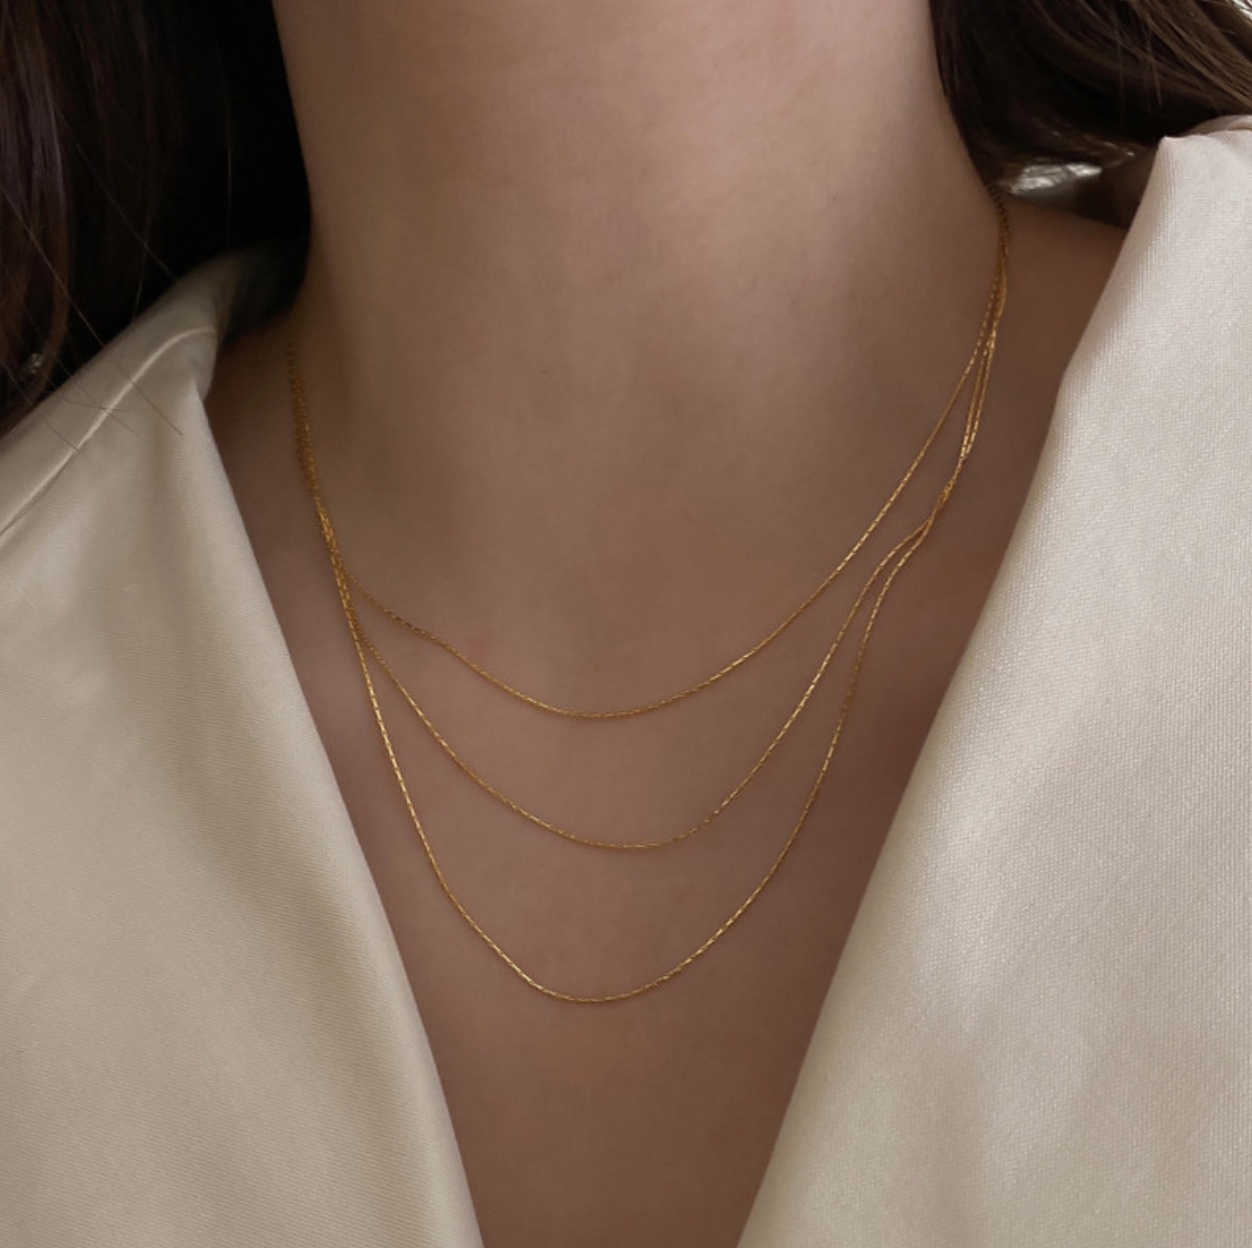 Gold Plated Stacked Chains. Affordable jewelry, Stainless Steel Jewelry, Sterling Silver Jewelry, Gold Plated Jewelry, Rose Gold Plated Jewelry, Cubic Zirconia Jewelry, High Quality Jewelry, Women Owned Small Business, Dainty Jewelry, Tennis Chain, Rope Chain, Herringbone Jewelry, Signet Ring, Baguette Ring, Women’s Jewelry, Hoop Earrings, Gold Hoops, Silver Hoops